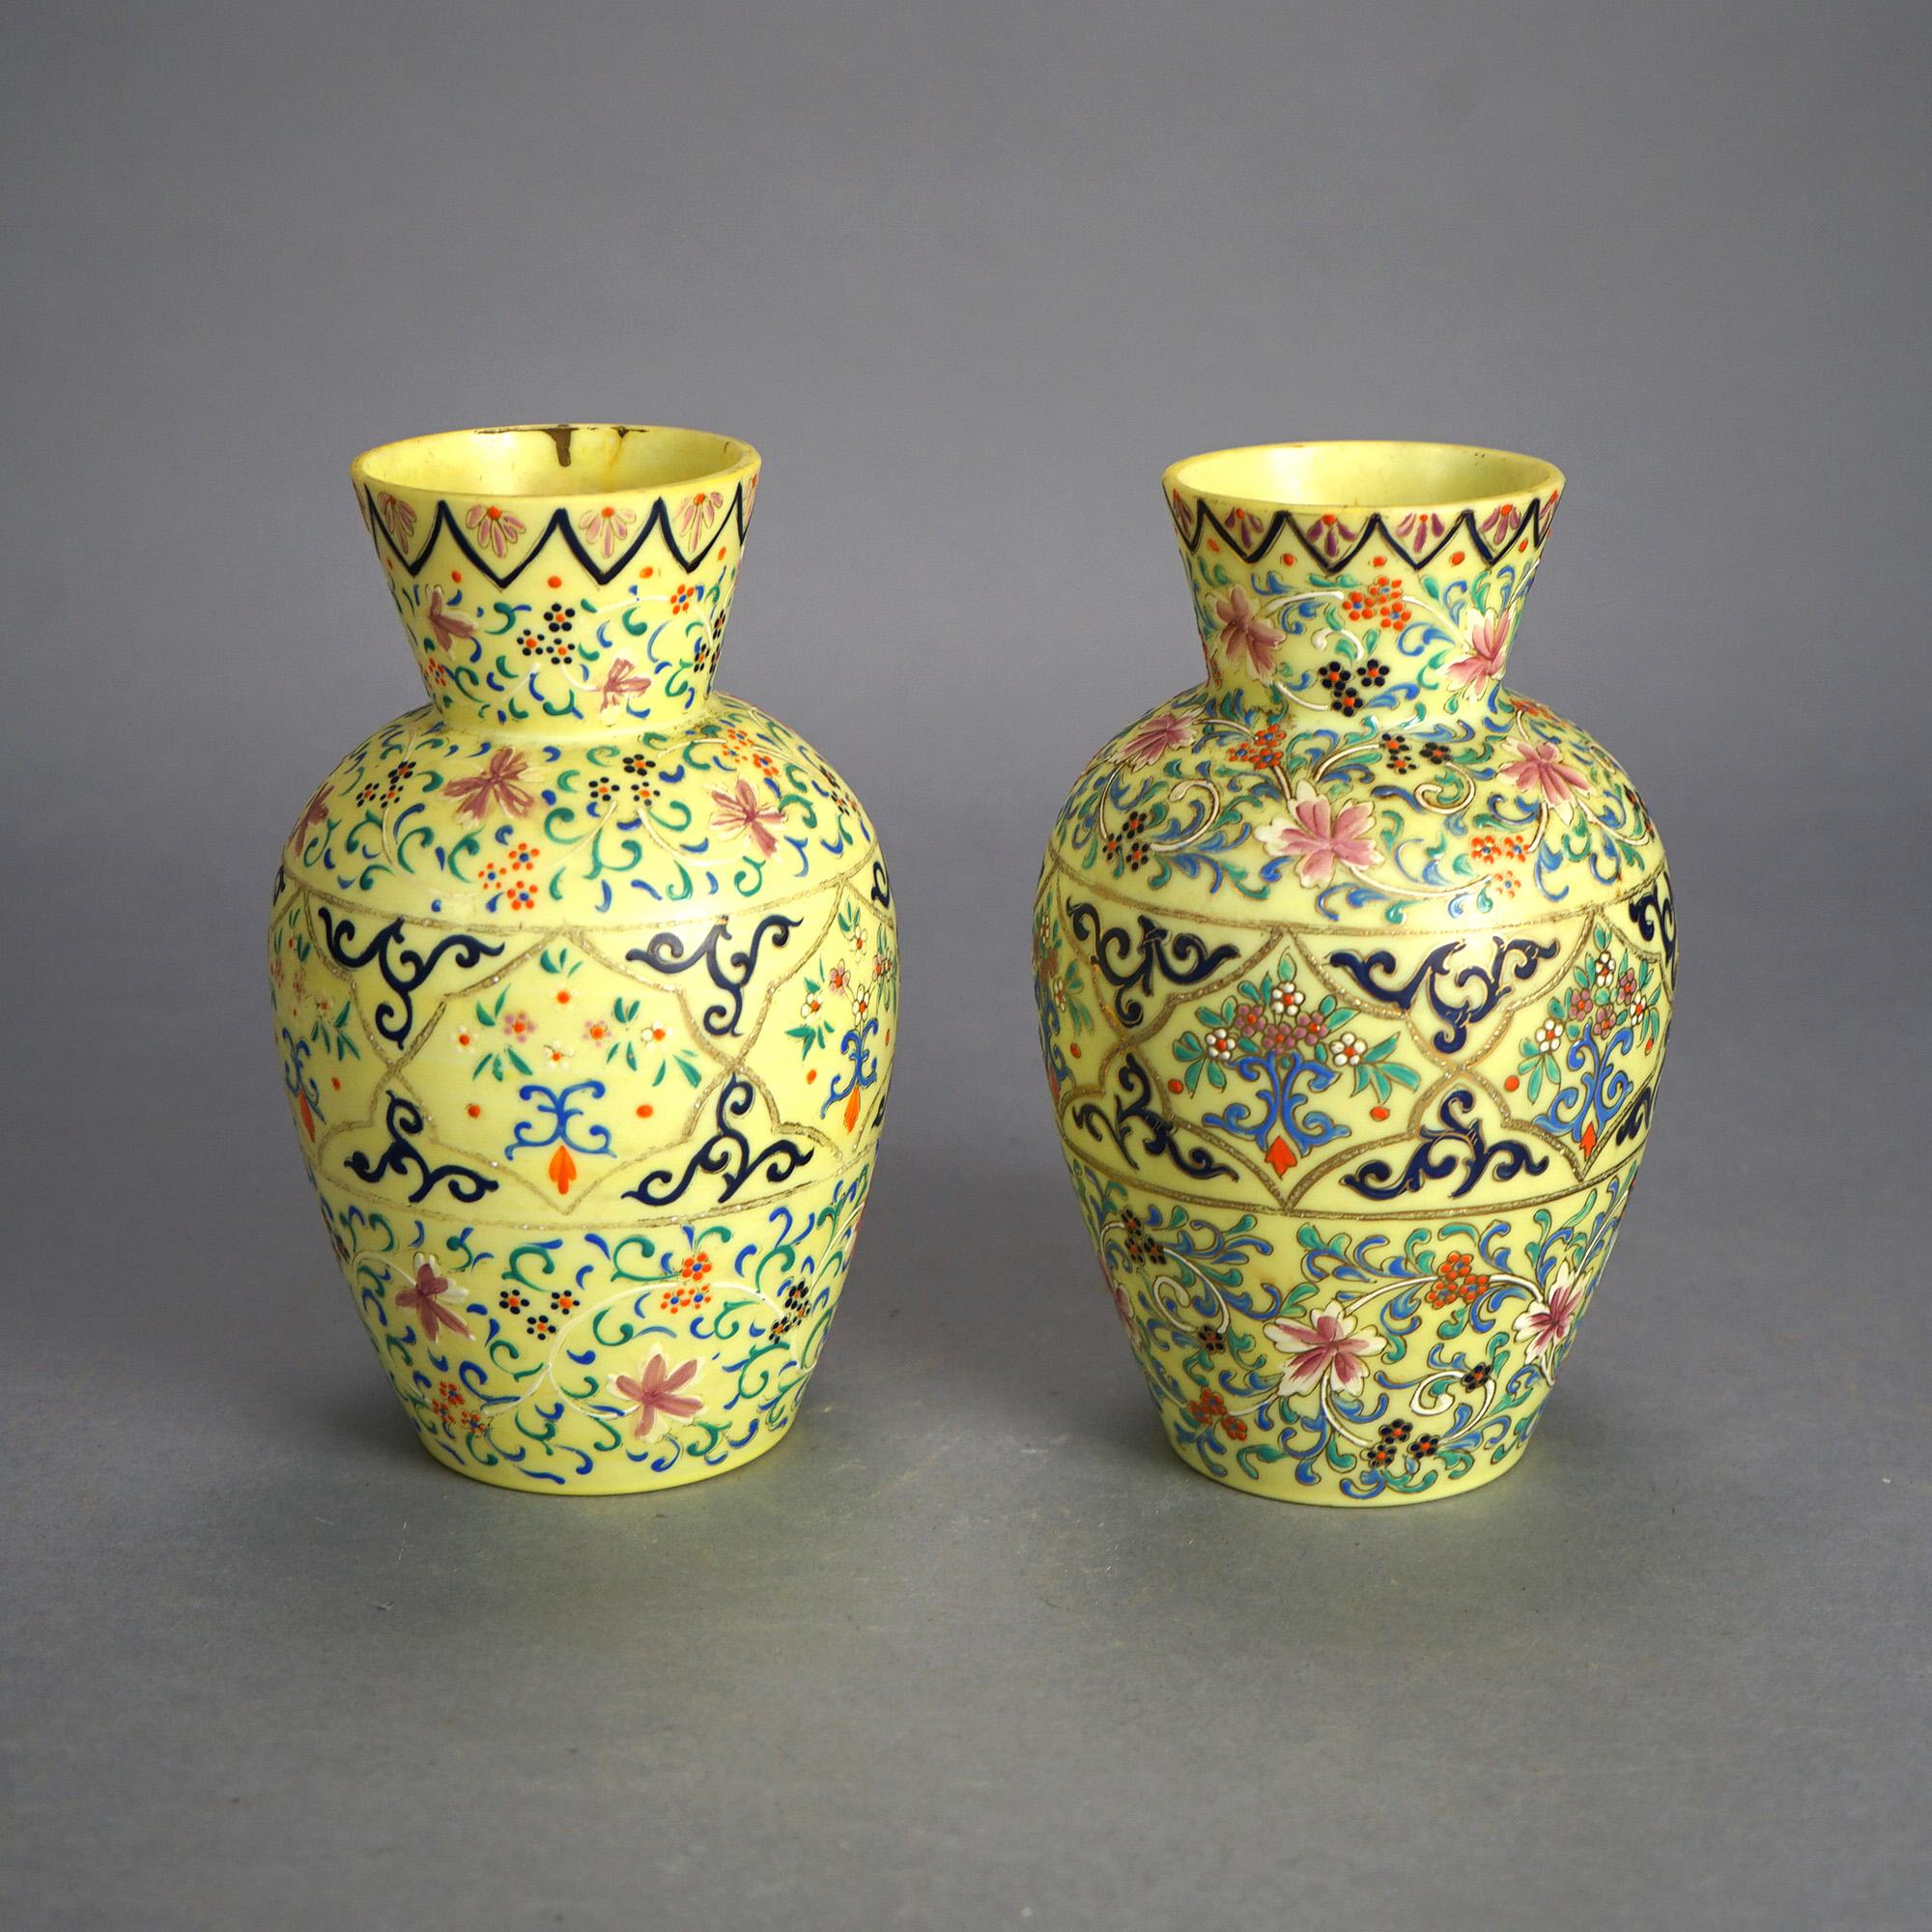 Antique Pair Opaline Enamel Decorated Art Glass Vases with Floral & Scroll C1900 For Sale 4